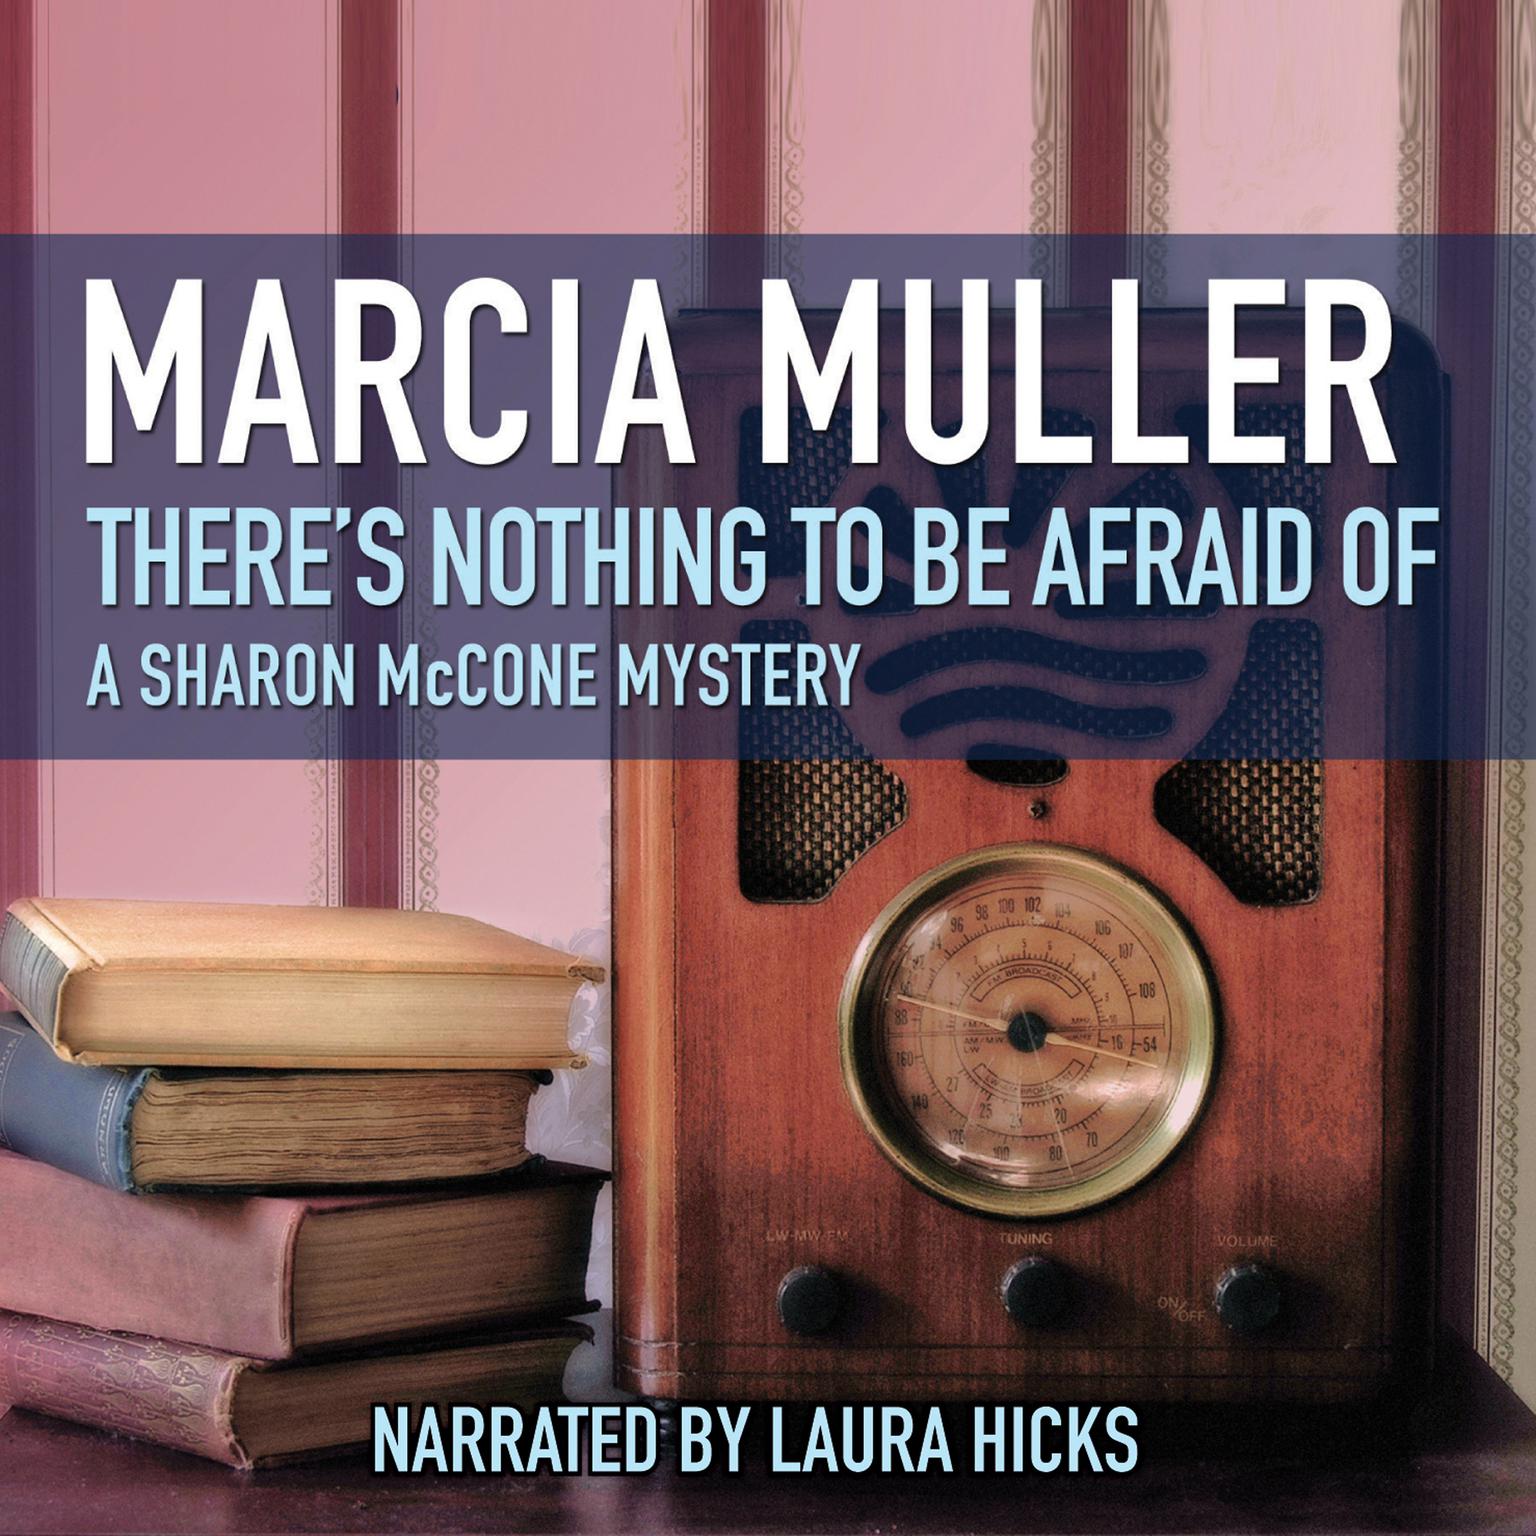 There’s Nothing to Be Afraid Of Audiobook, by Marcia Muller